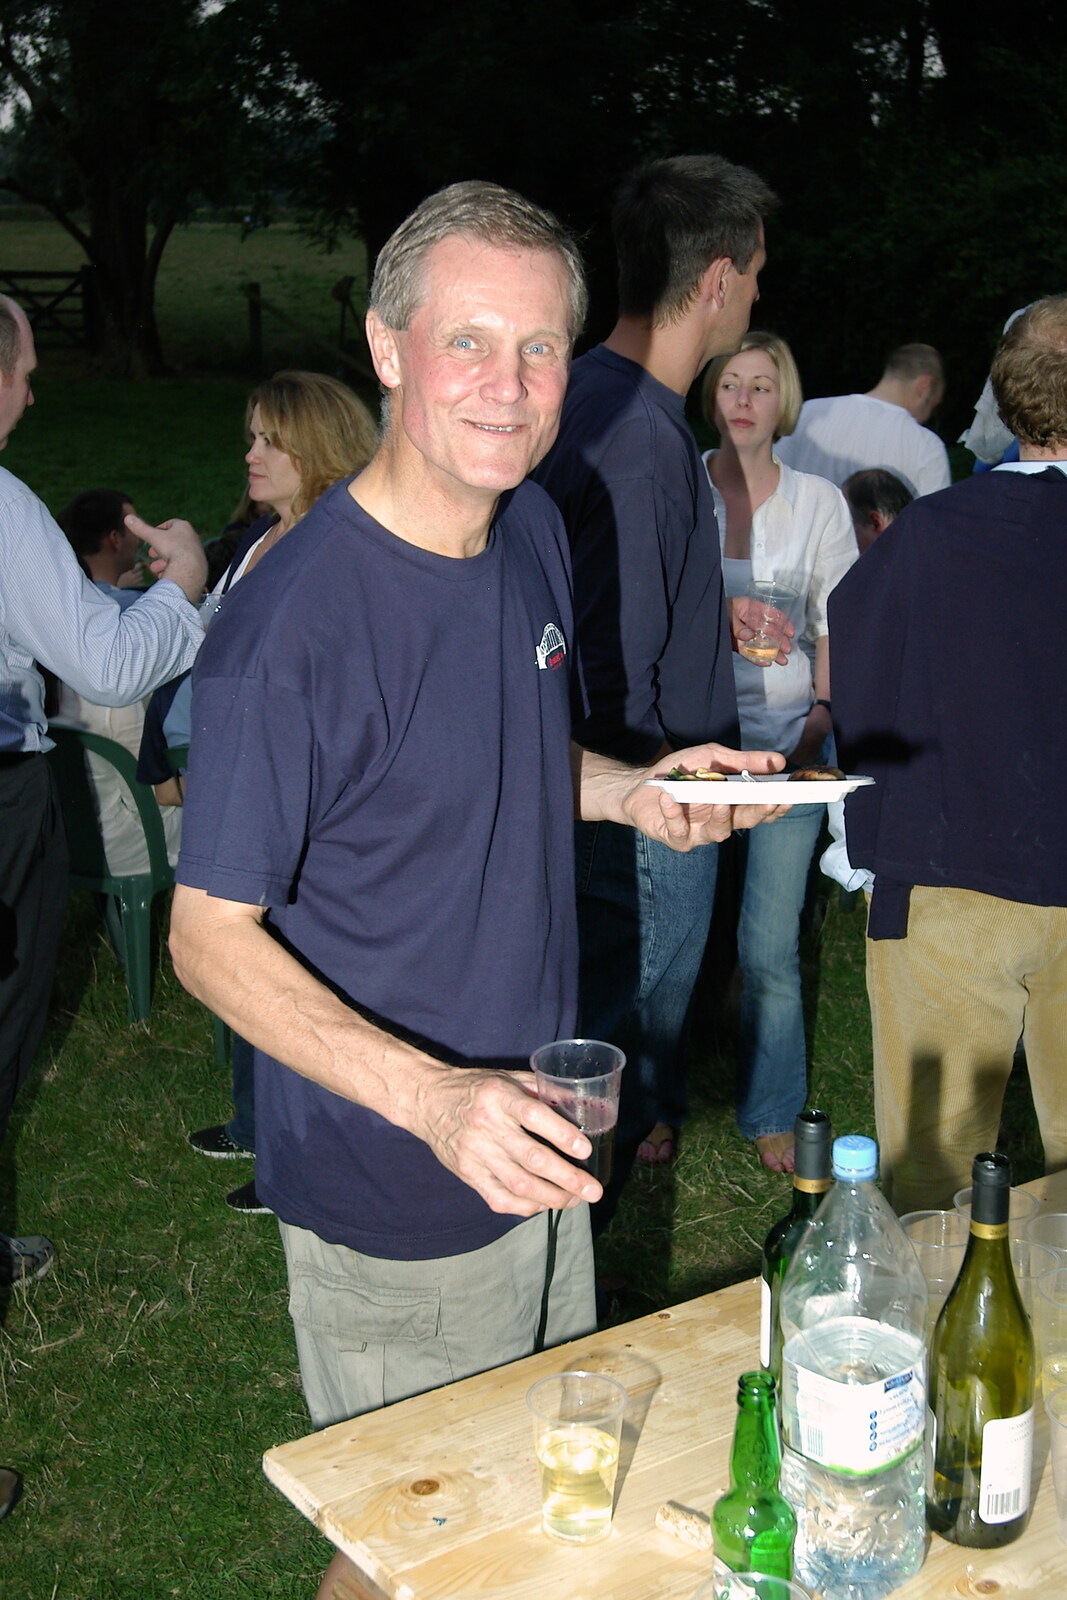 Tim Simpson with a glass of red wine from Qualcomm goes Punting on the Cam, Grantchester Meadows, Cambridge - 18th August 2005